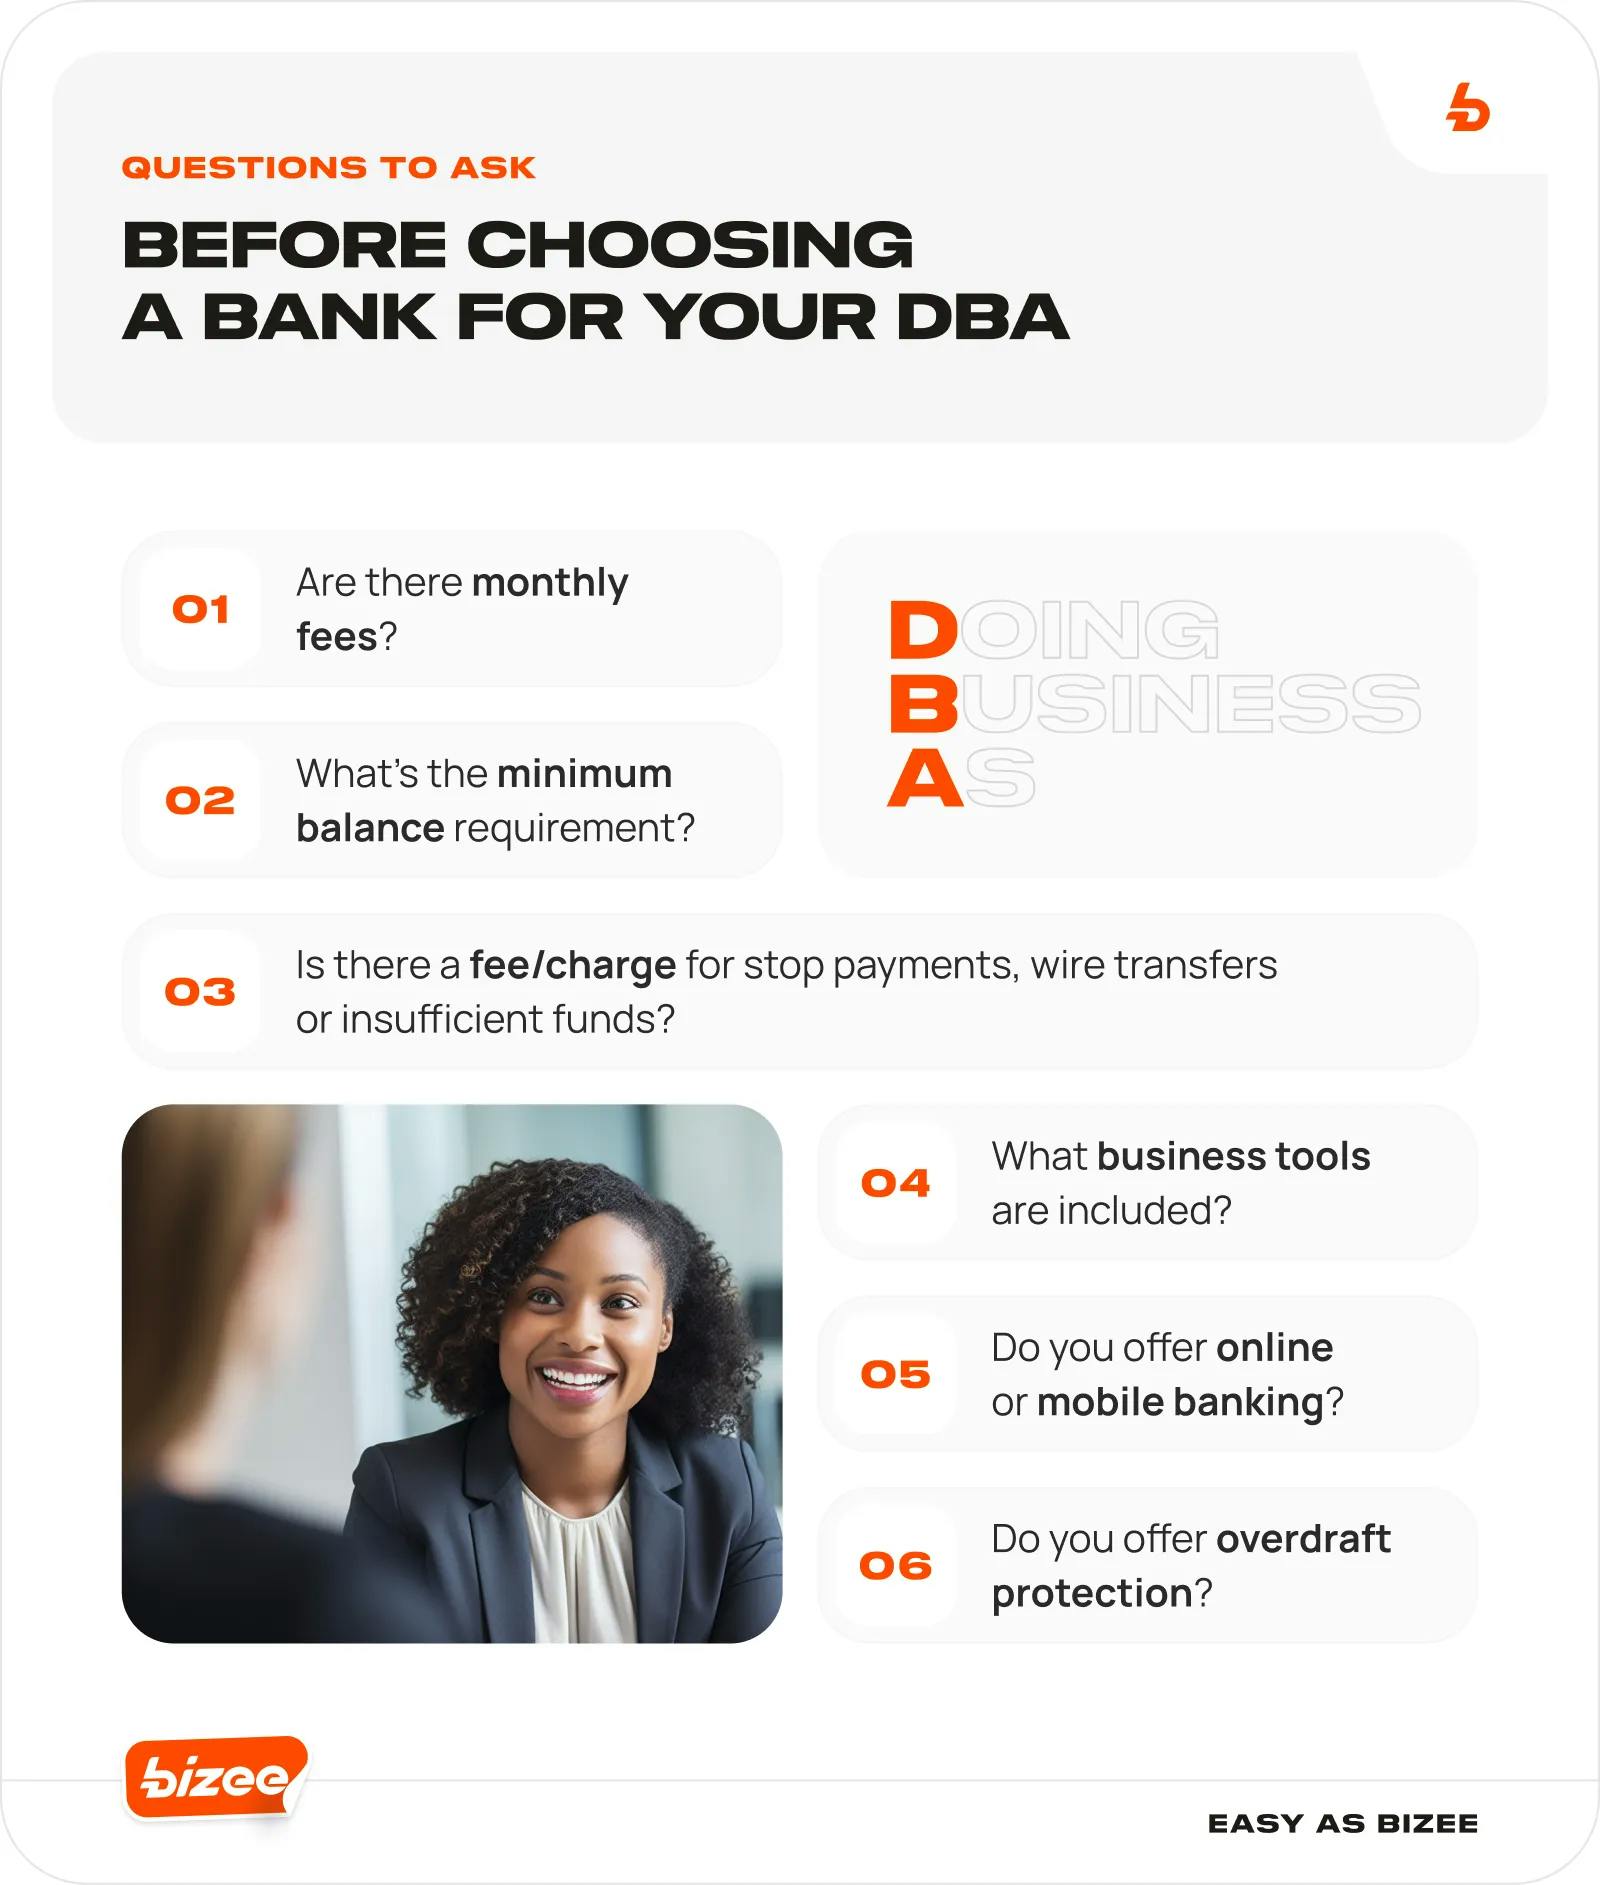 Questions to Ask Before Choosing a Bank for Your DBA